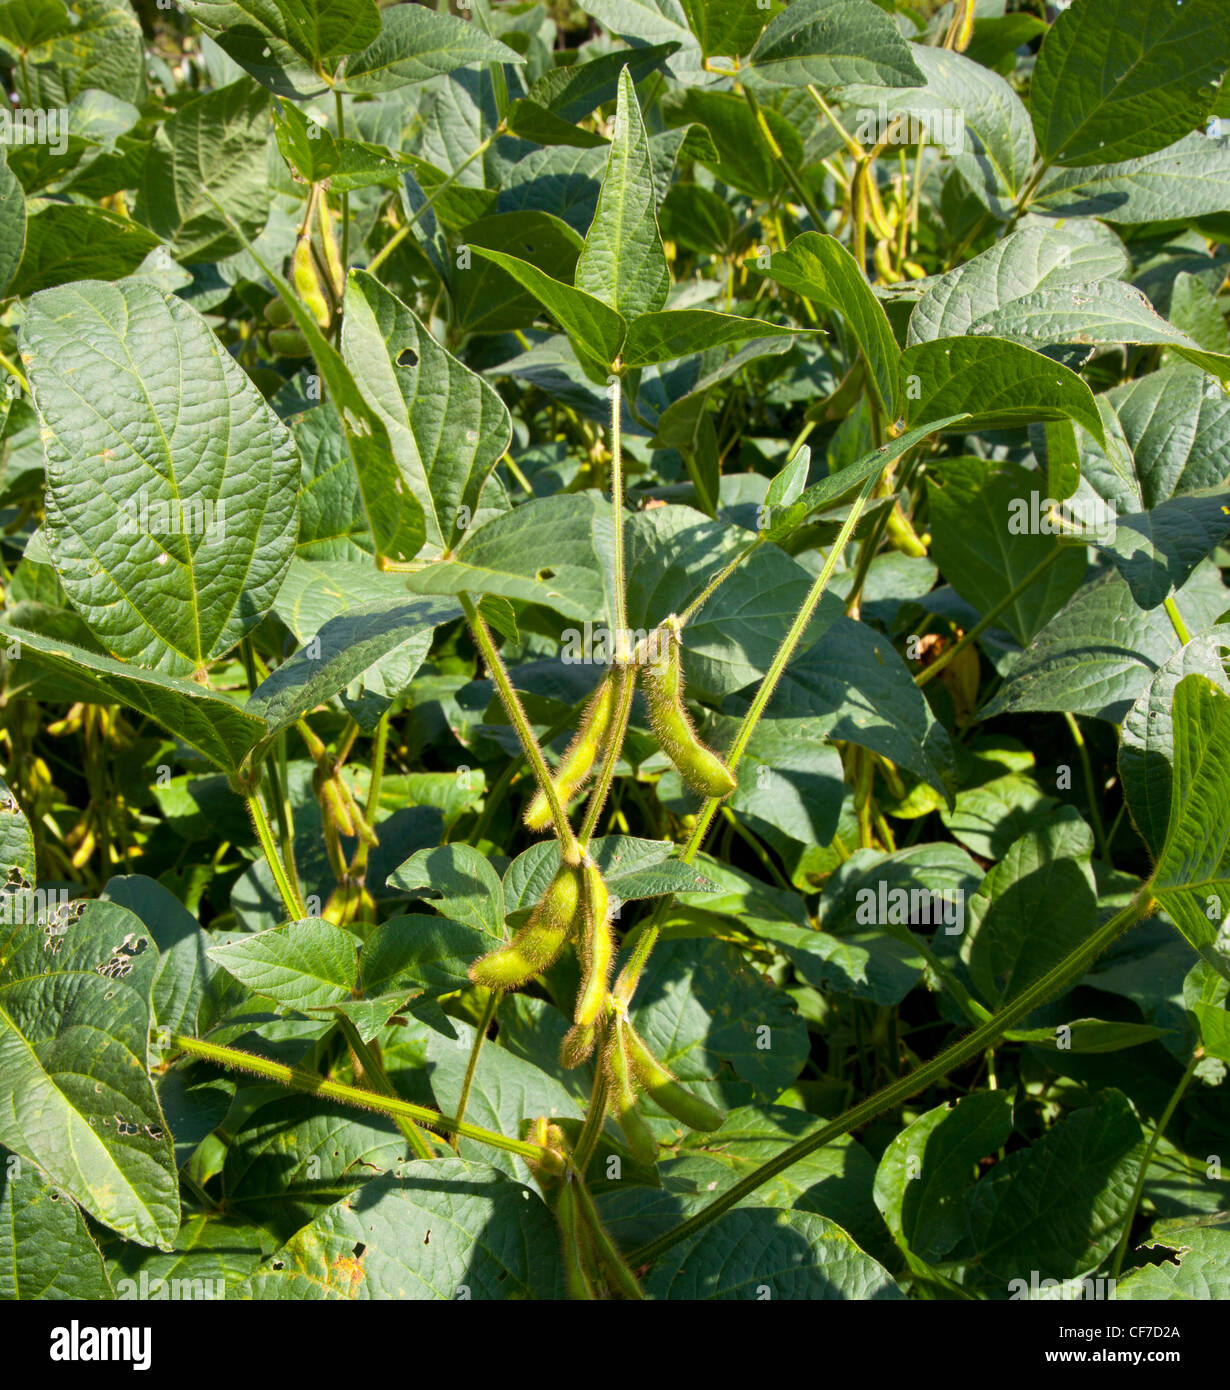 Close up of soy bean pods grown on farm as a source of oil and biodiesel Stock Photo